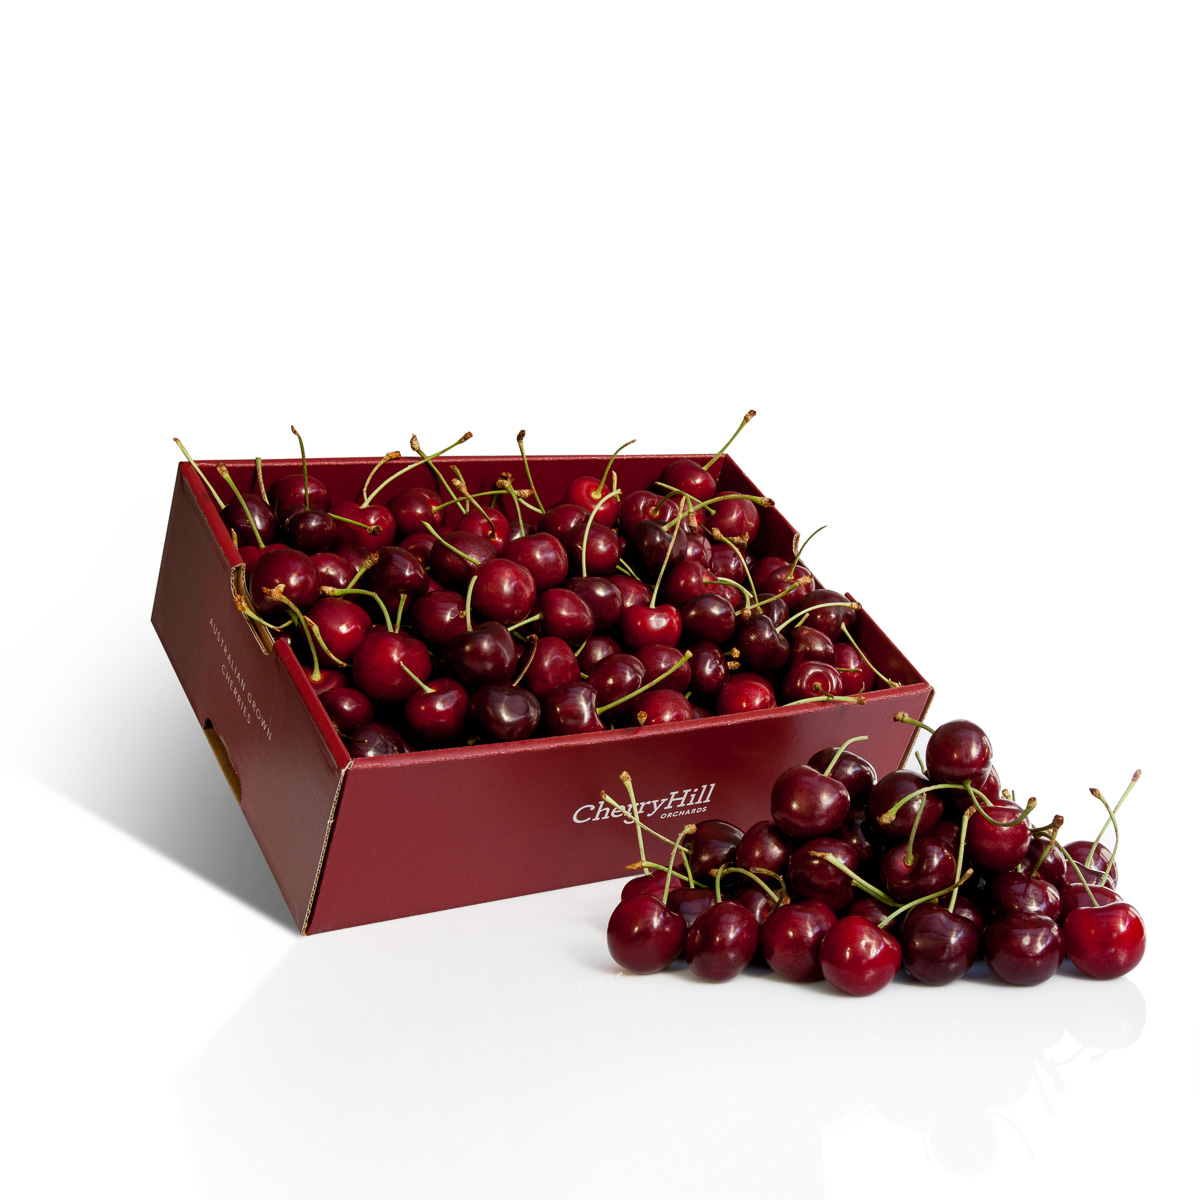 Limited Edition 80th Anniversary Gift Box CherryHill Orchards